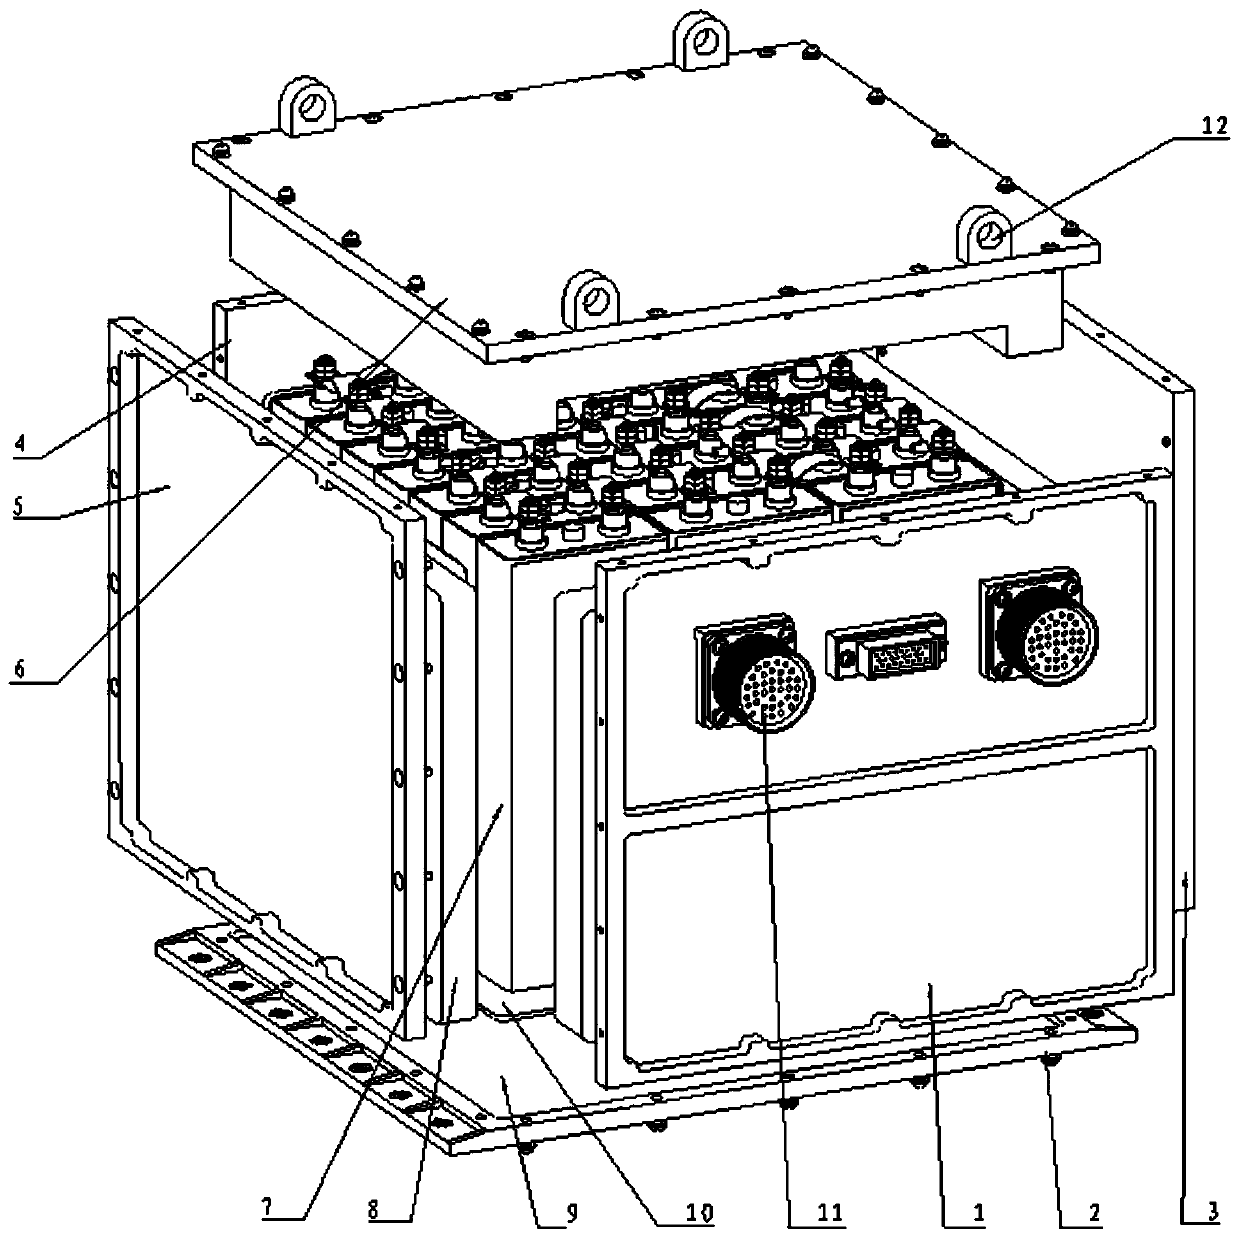 Lithium ion battery pack for upper stage